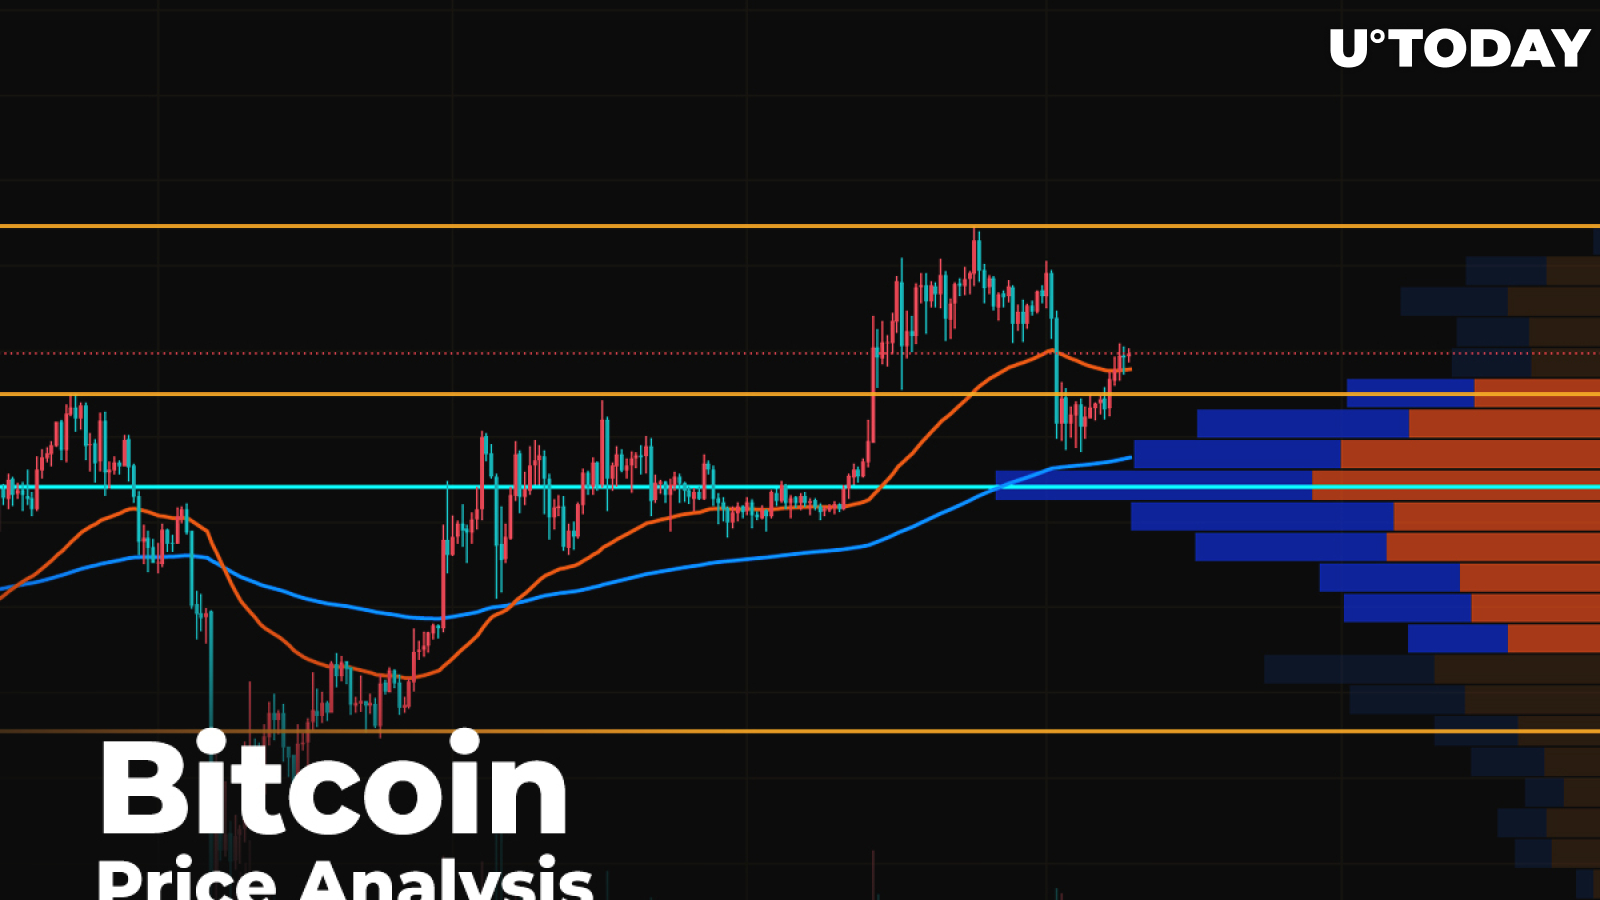 Bitcoin (BTC) Price Analysis—Considering Chances of Bulls to Fix Above $11,000 in Short Term